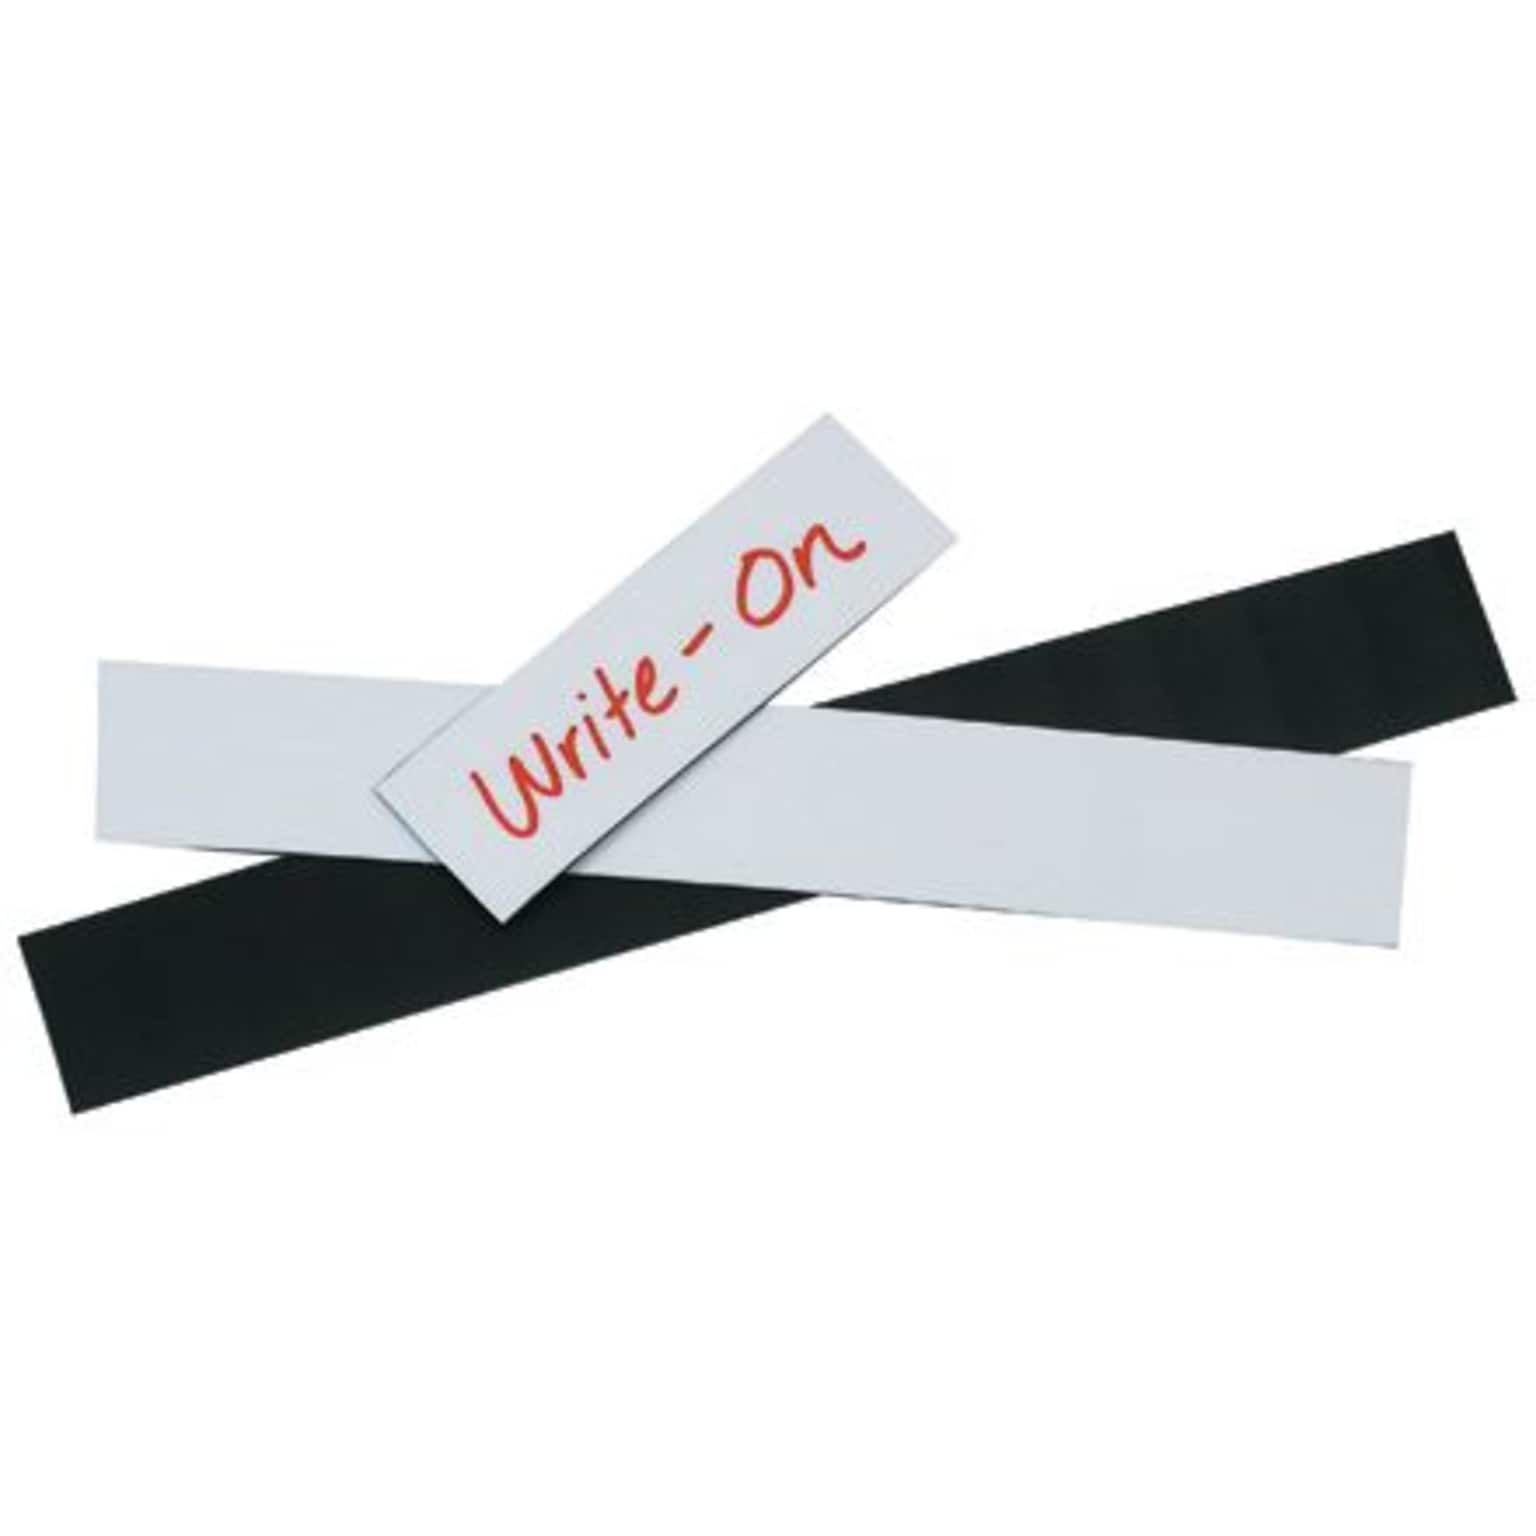 Quill Brand® 3 x 3 Warehouse Label Magnetic Strips, White (LH181)